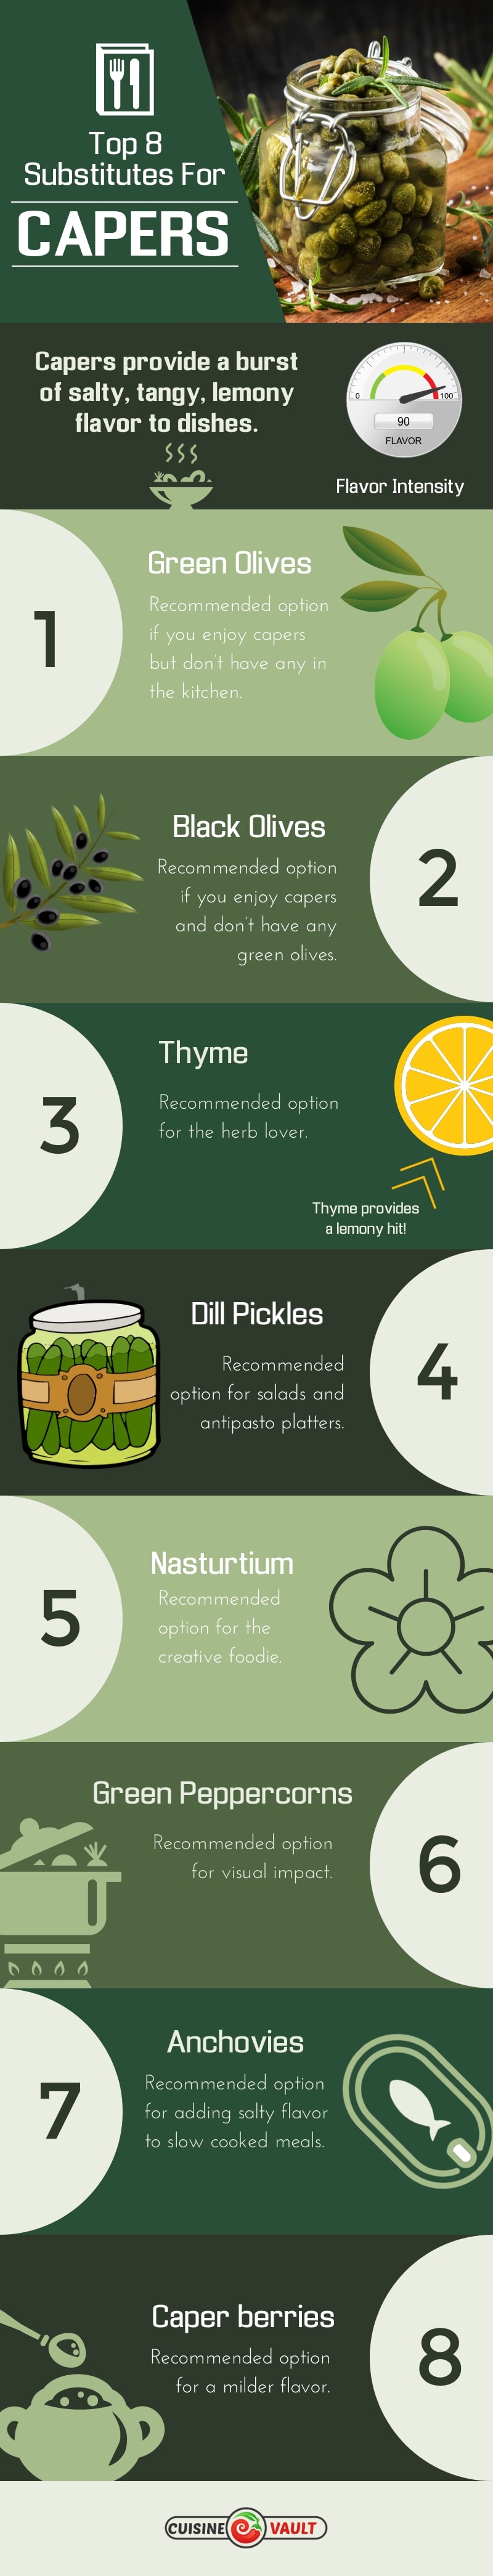 An infographic showing eight alternatives to capers.